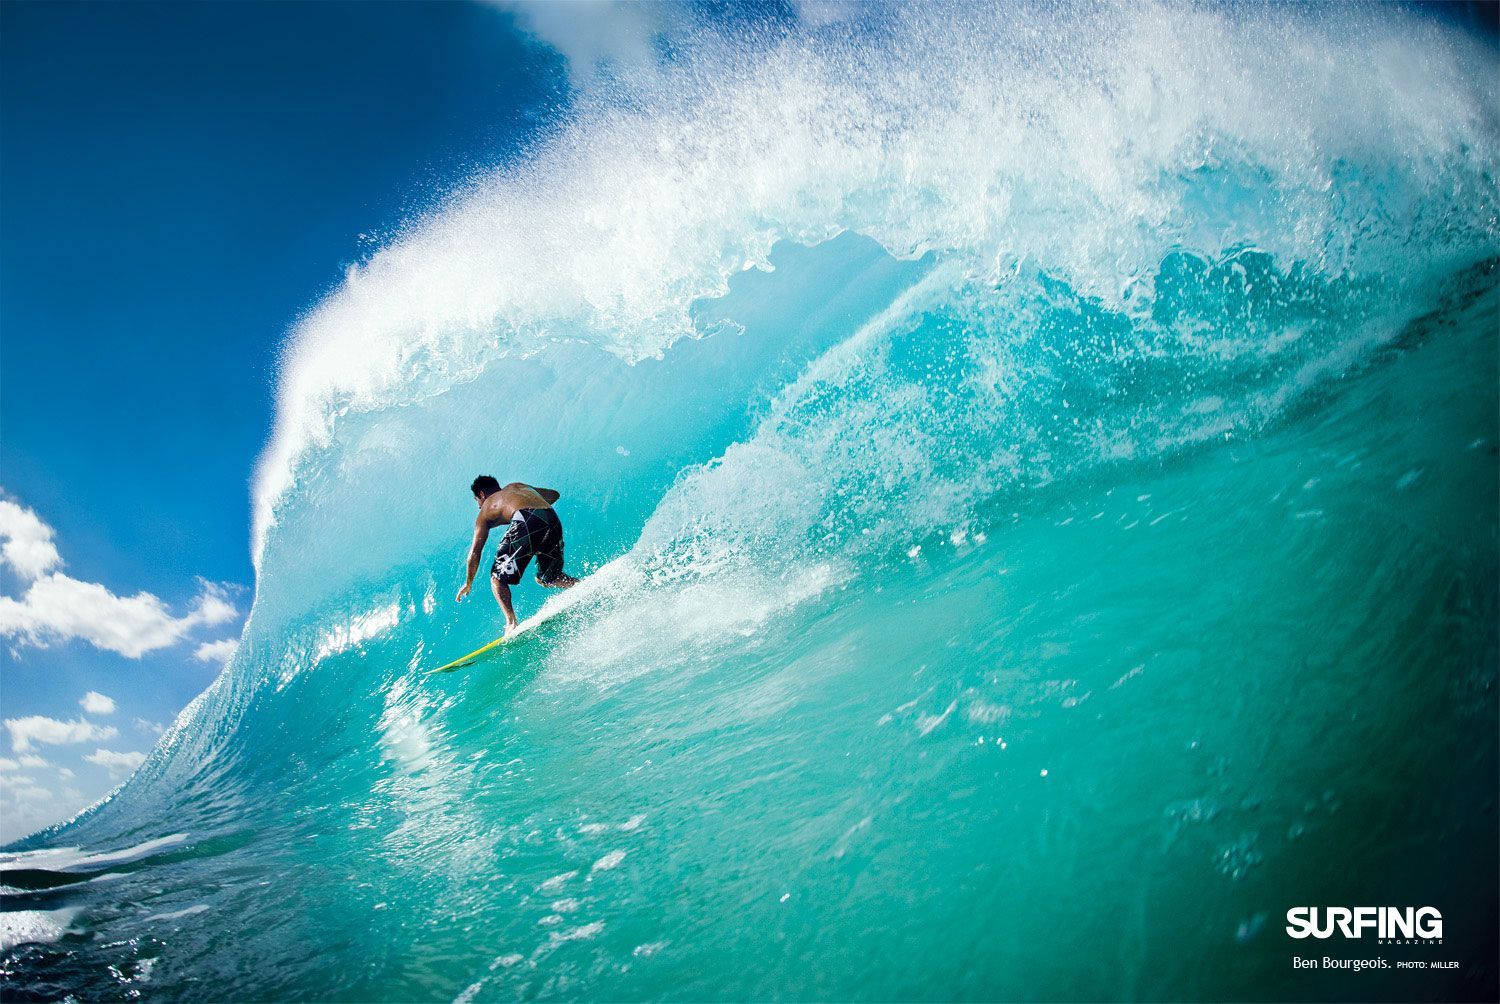 Desktop Wallpapers / Awesome Photos from Surfing Magazine SURFBANG